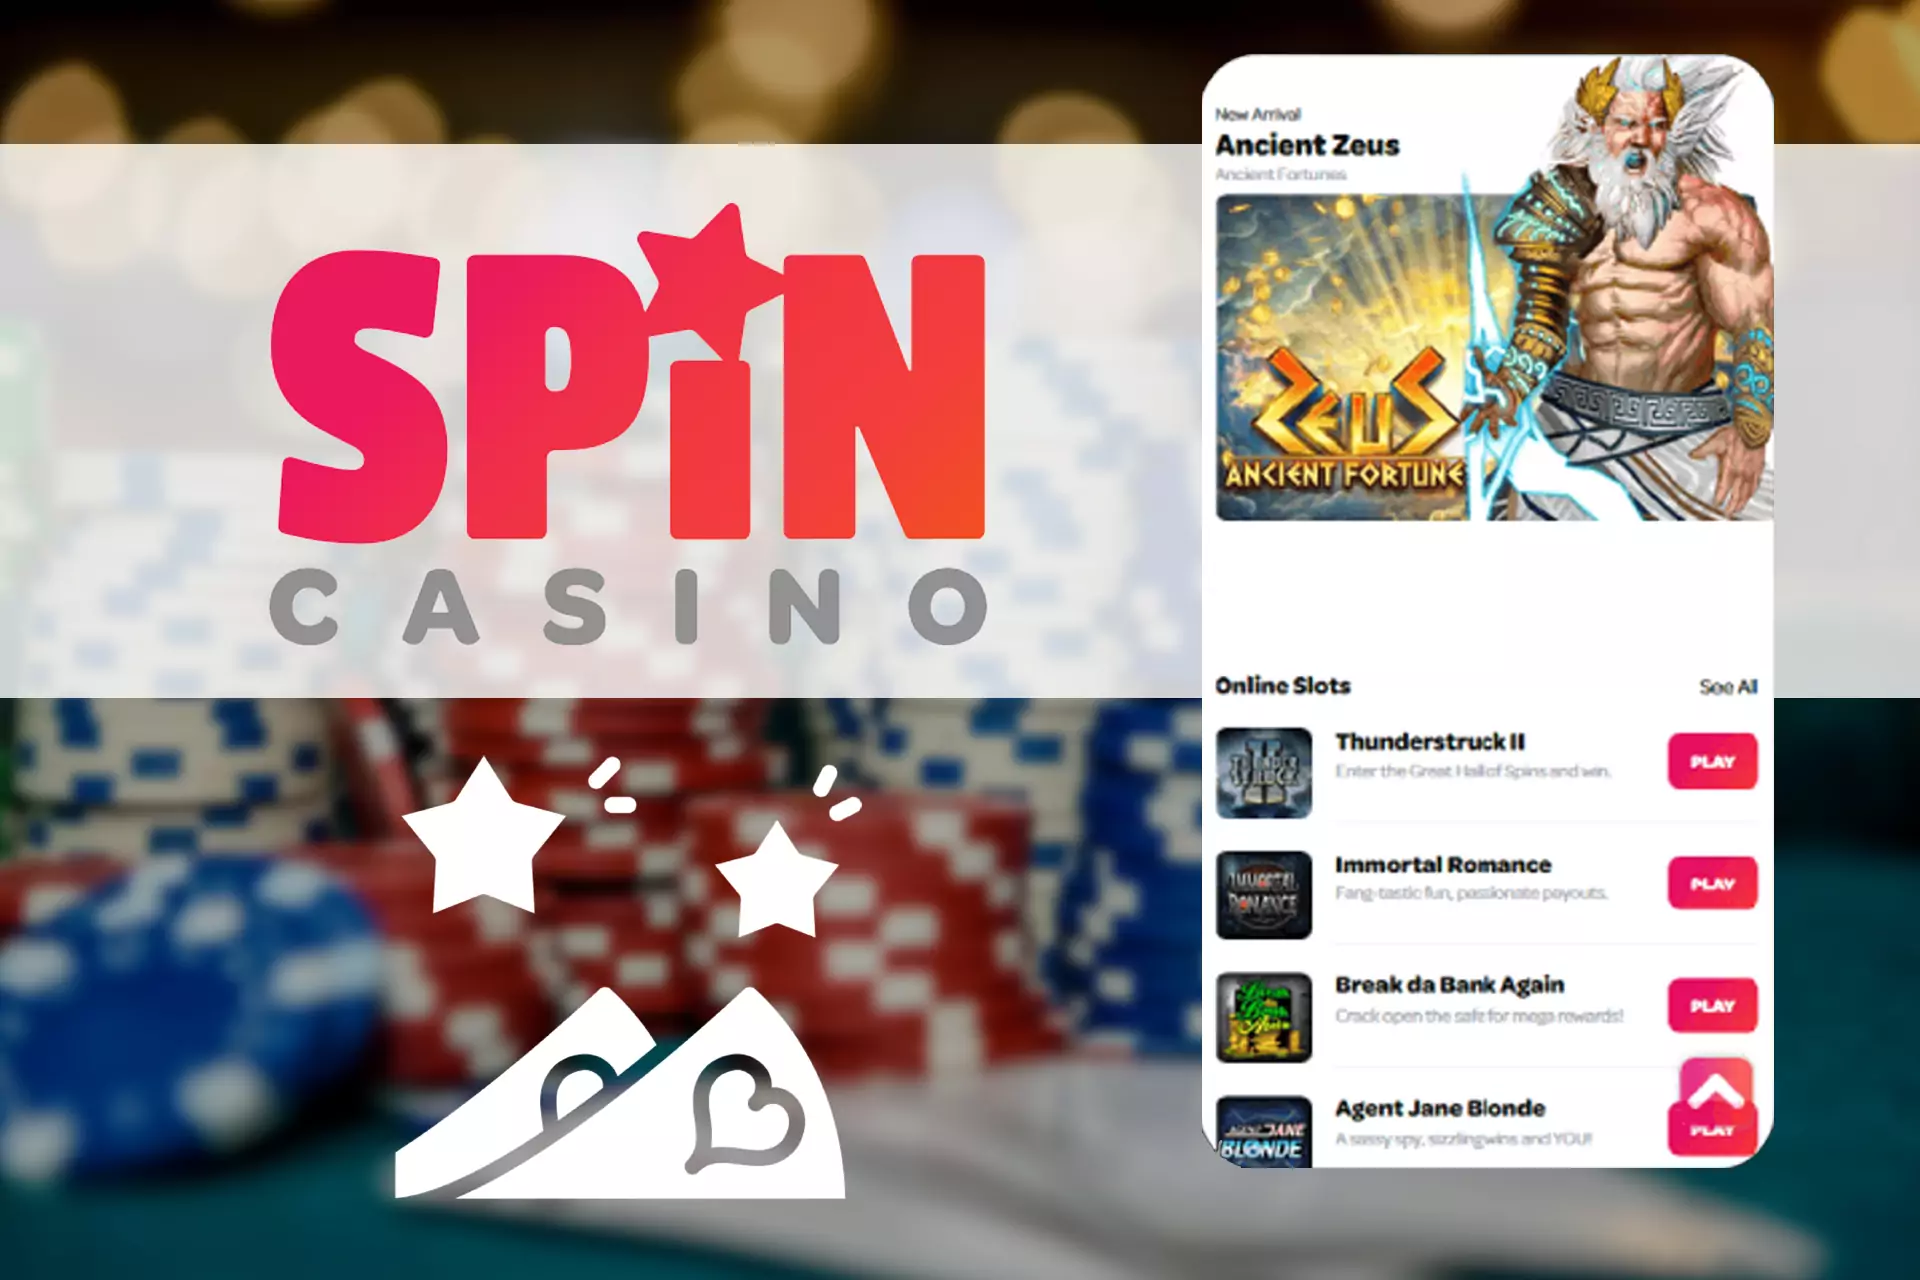 Casino fans can play slots and table games in the special section.